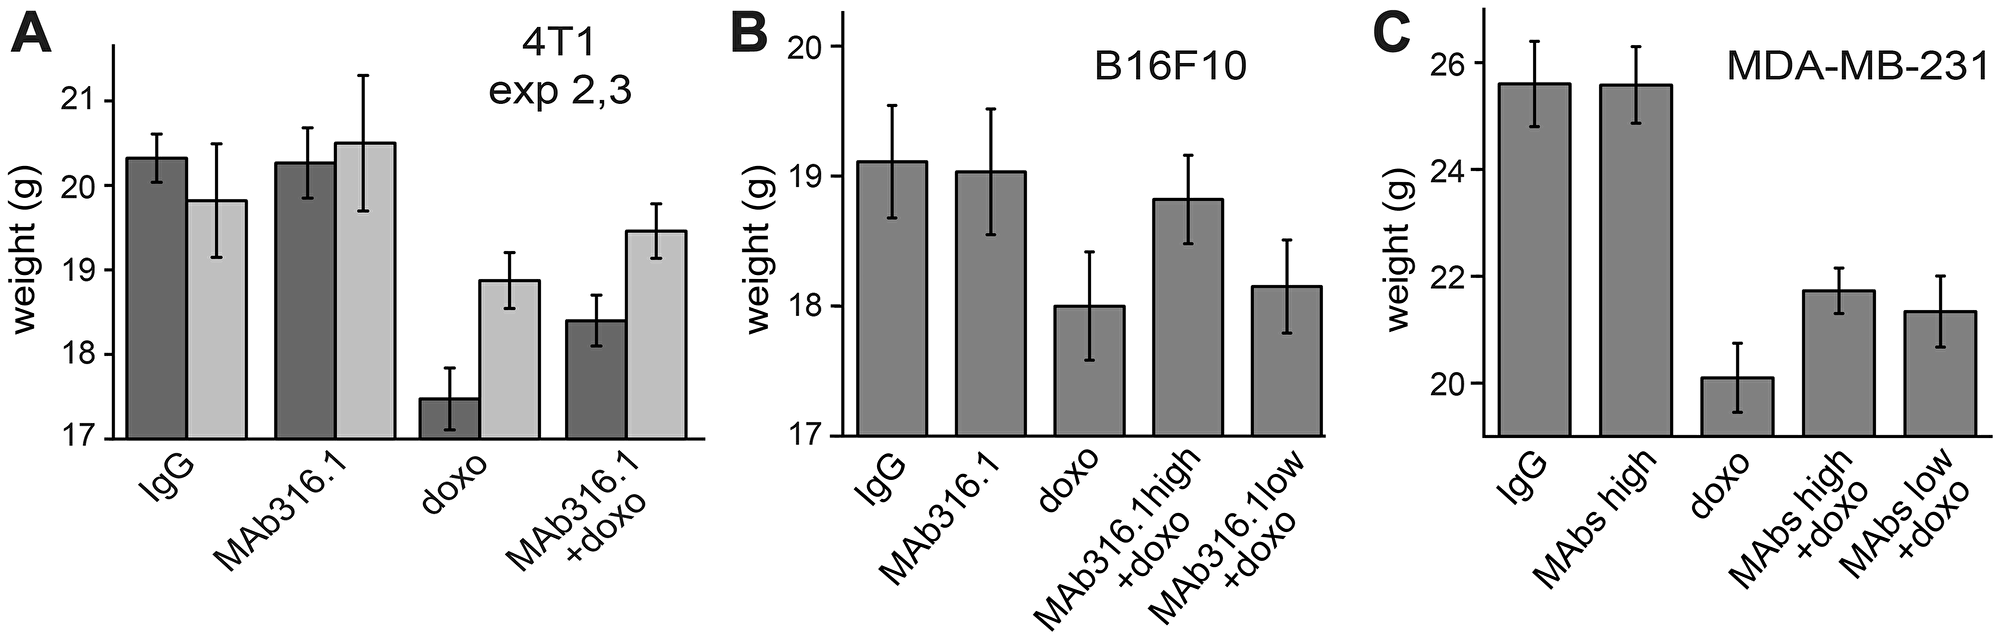 Body weights of mice following treatments with QSOX1 inhibitory antibodies and chemotherapy.